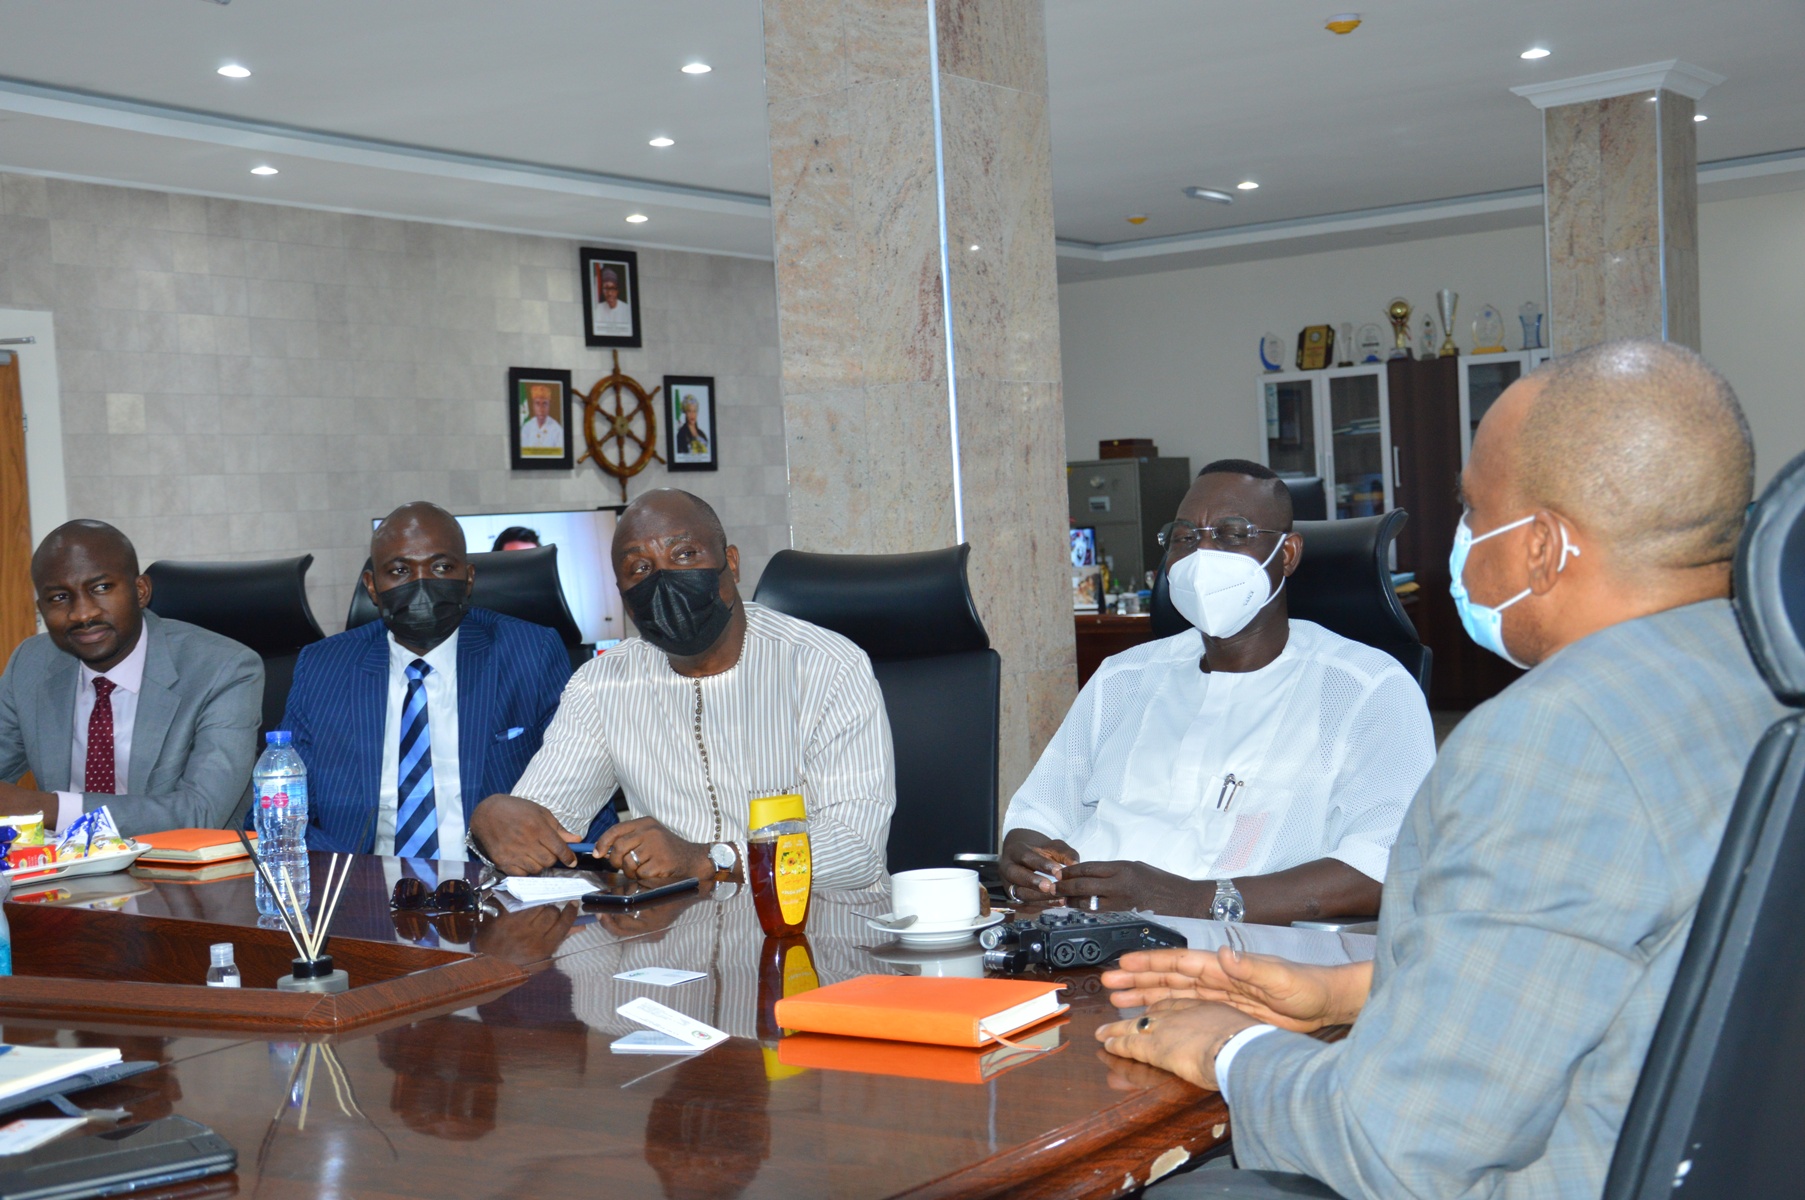 L-R: Yusuf Yaro, Personal Assistant to SIFAX Group’s GEVC; Idris Wiwoloku, Head, Trusted Risk Managers Insurance Company, the insurance subsidiary of SIFAX Group; Captain Ibrahim Olugbade, Executive Director, SIFAX Off Dock; Dr. Taiwo Afolabi, Group Executive Vice Chairman, SIFAX Group and Dr. Bashir Jamoh, Director General, Nigerian Maritime Administration and Safety Agency during the courtesy visit by SIFAX Group’s Management team to the NIMASA DG at the organisation’s head office at Apapa. At the visit, SIFAX Group and NIMASA agreed to explore opportunities for a better working relationship and the continued growth of the country’s maritime sector.